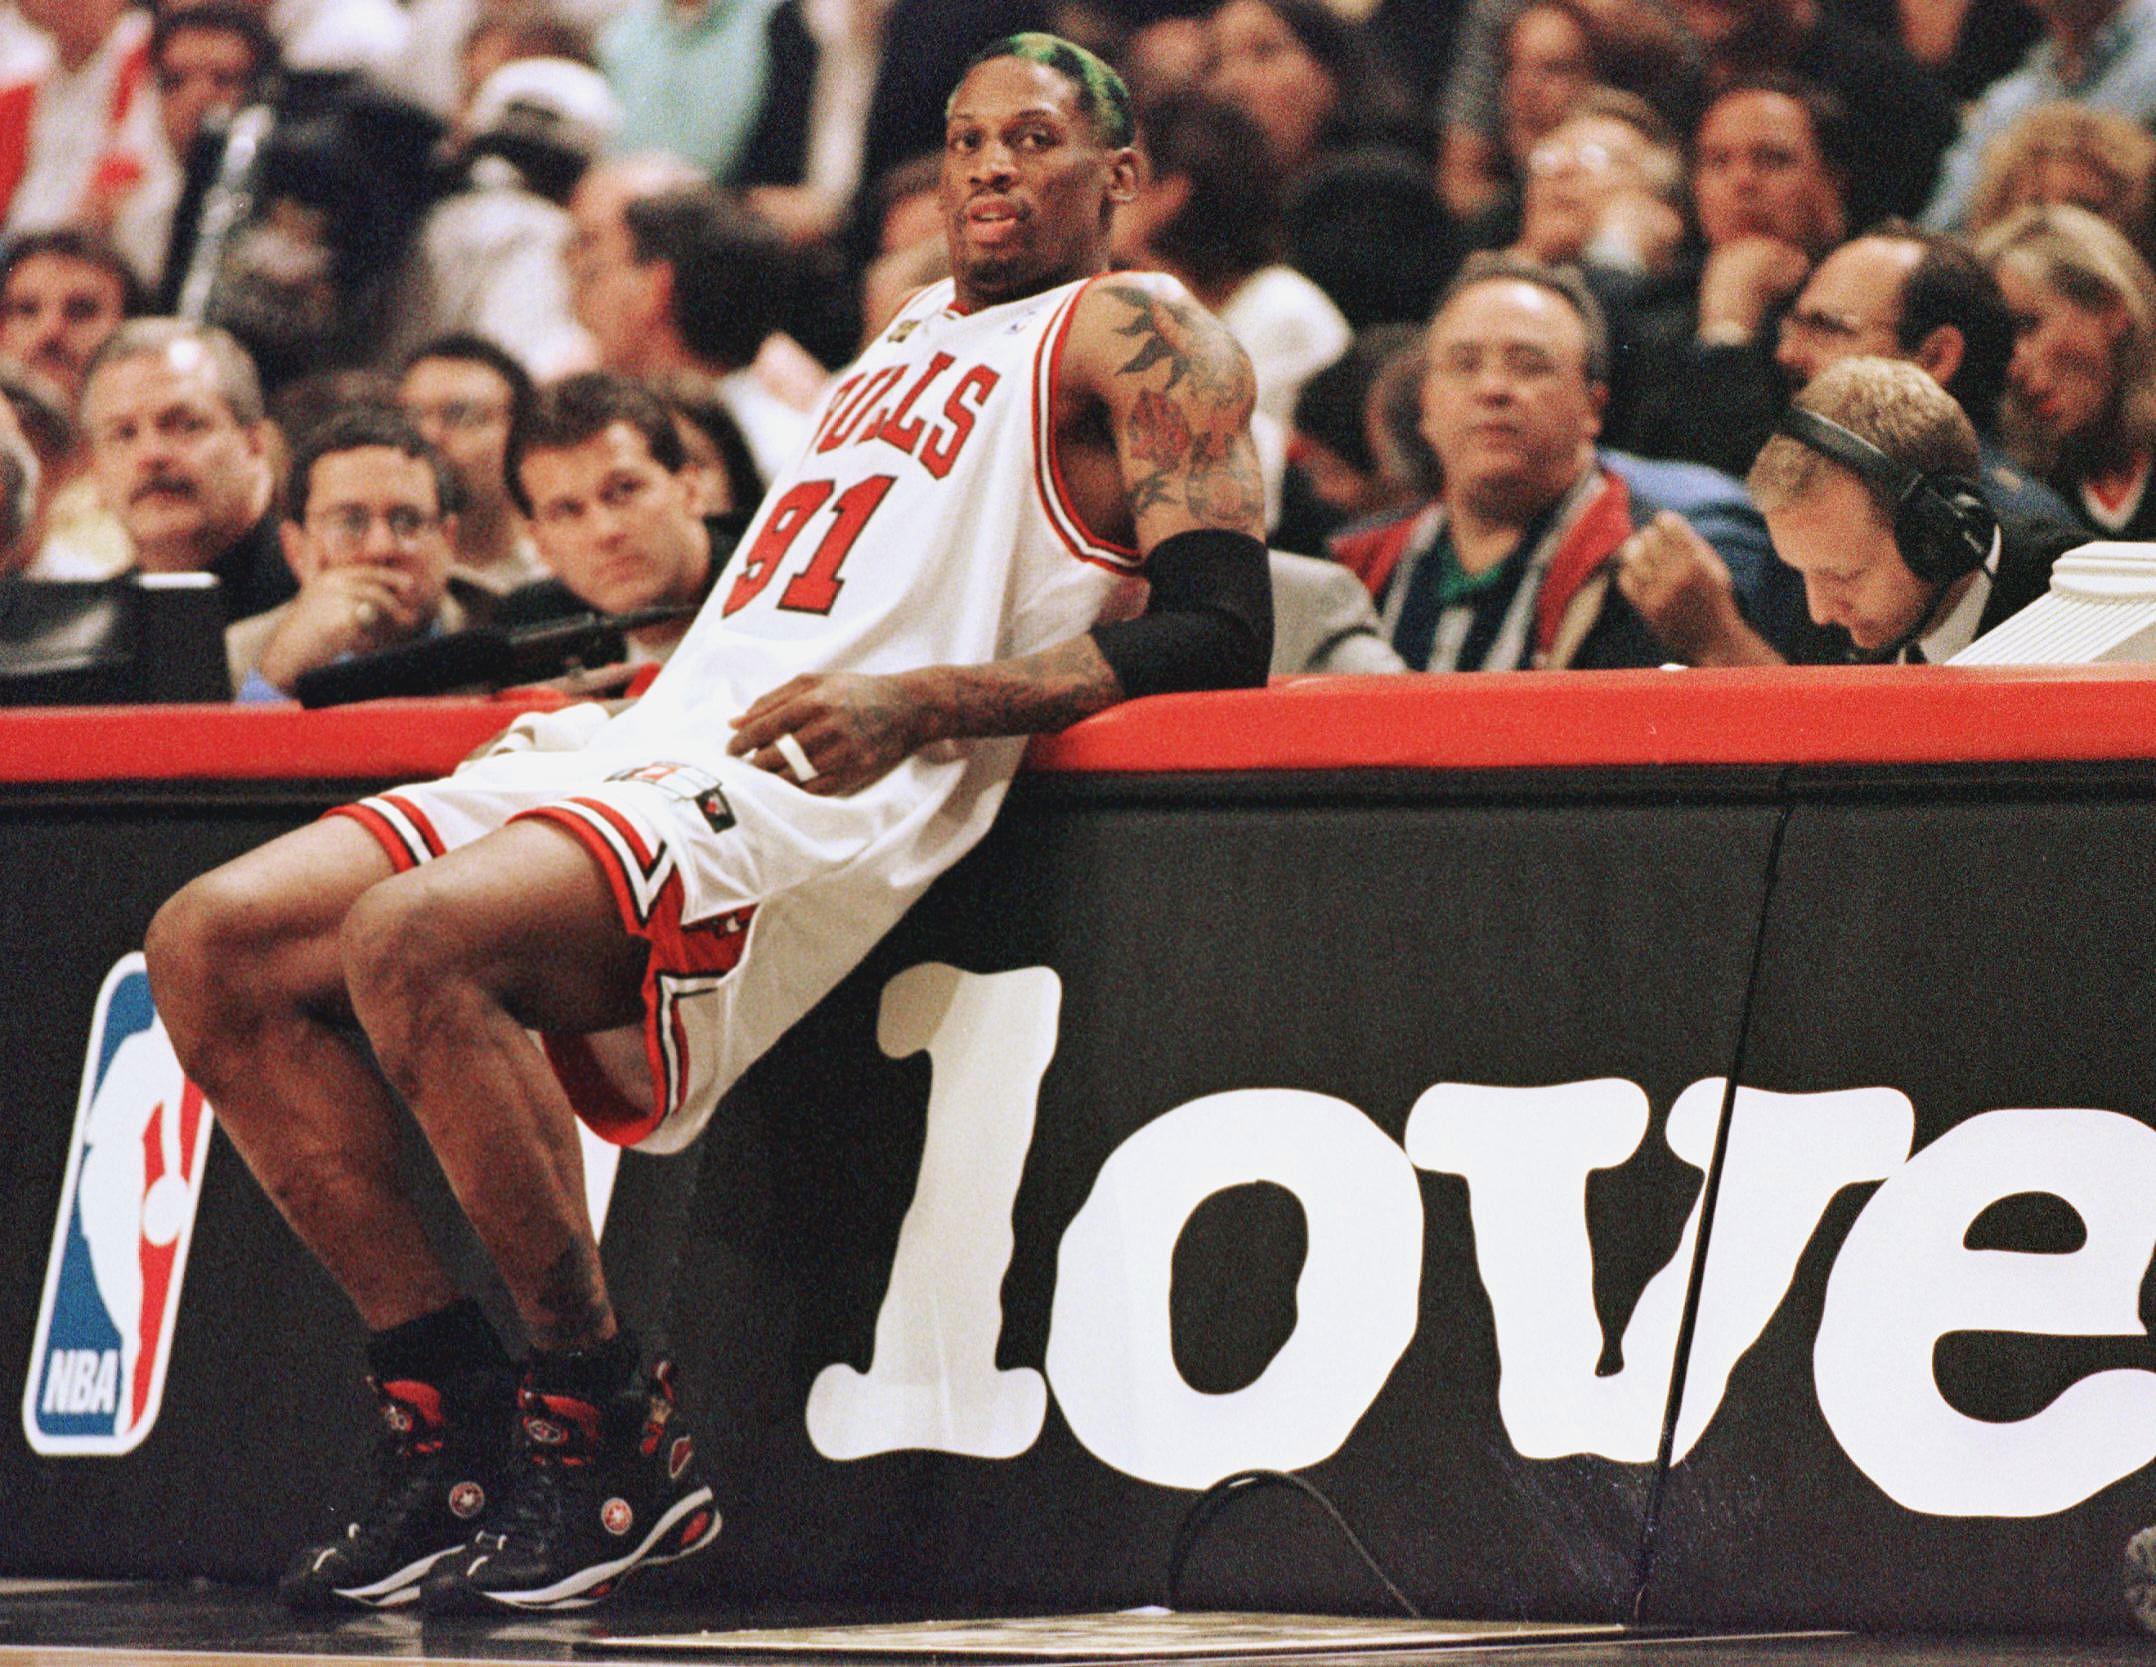 Dennis Rodman waits to enter a game during his days with the Chicago Bulls.